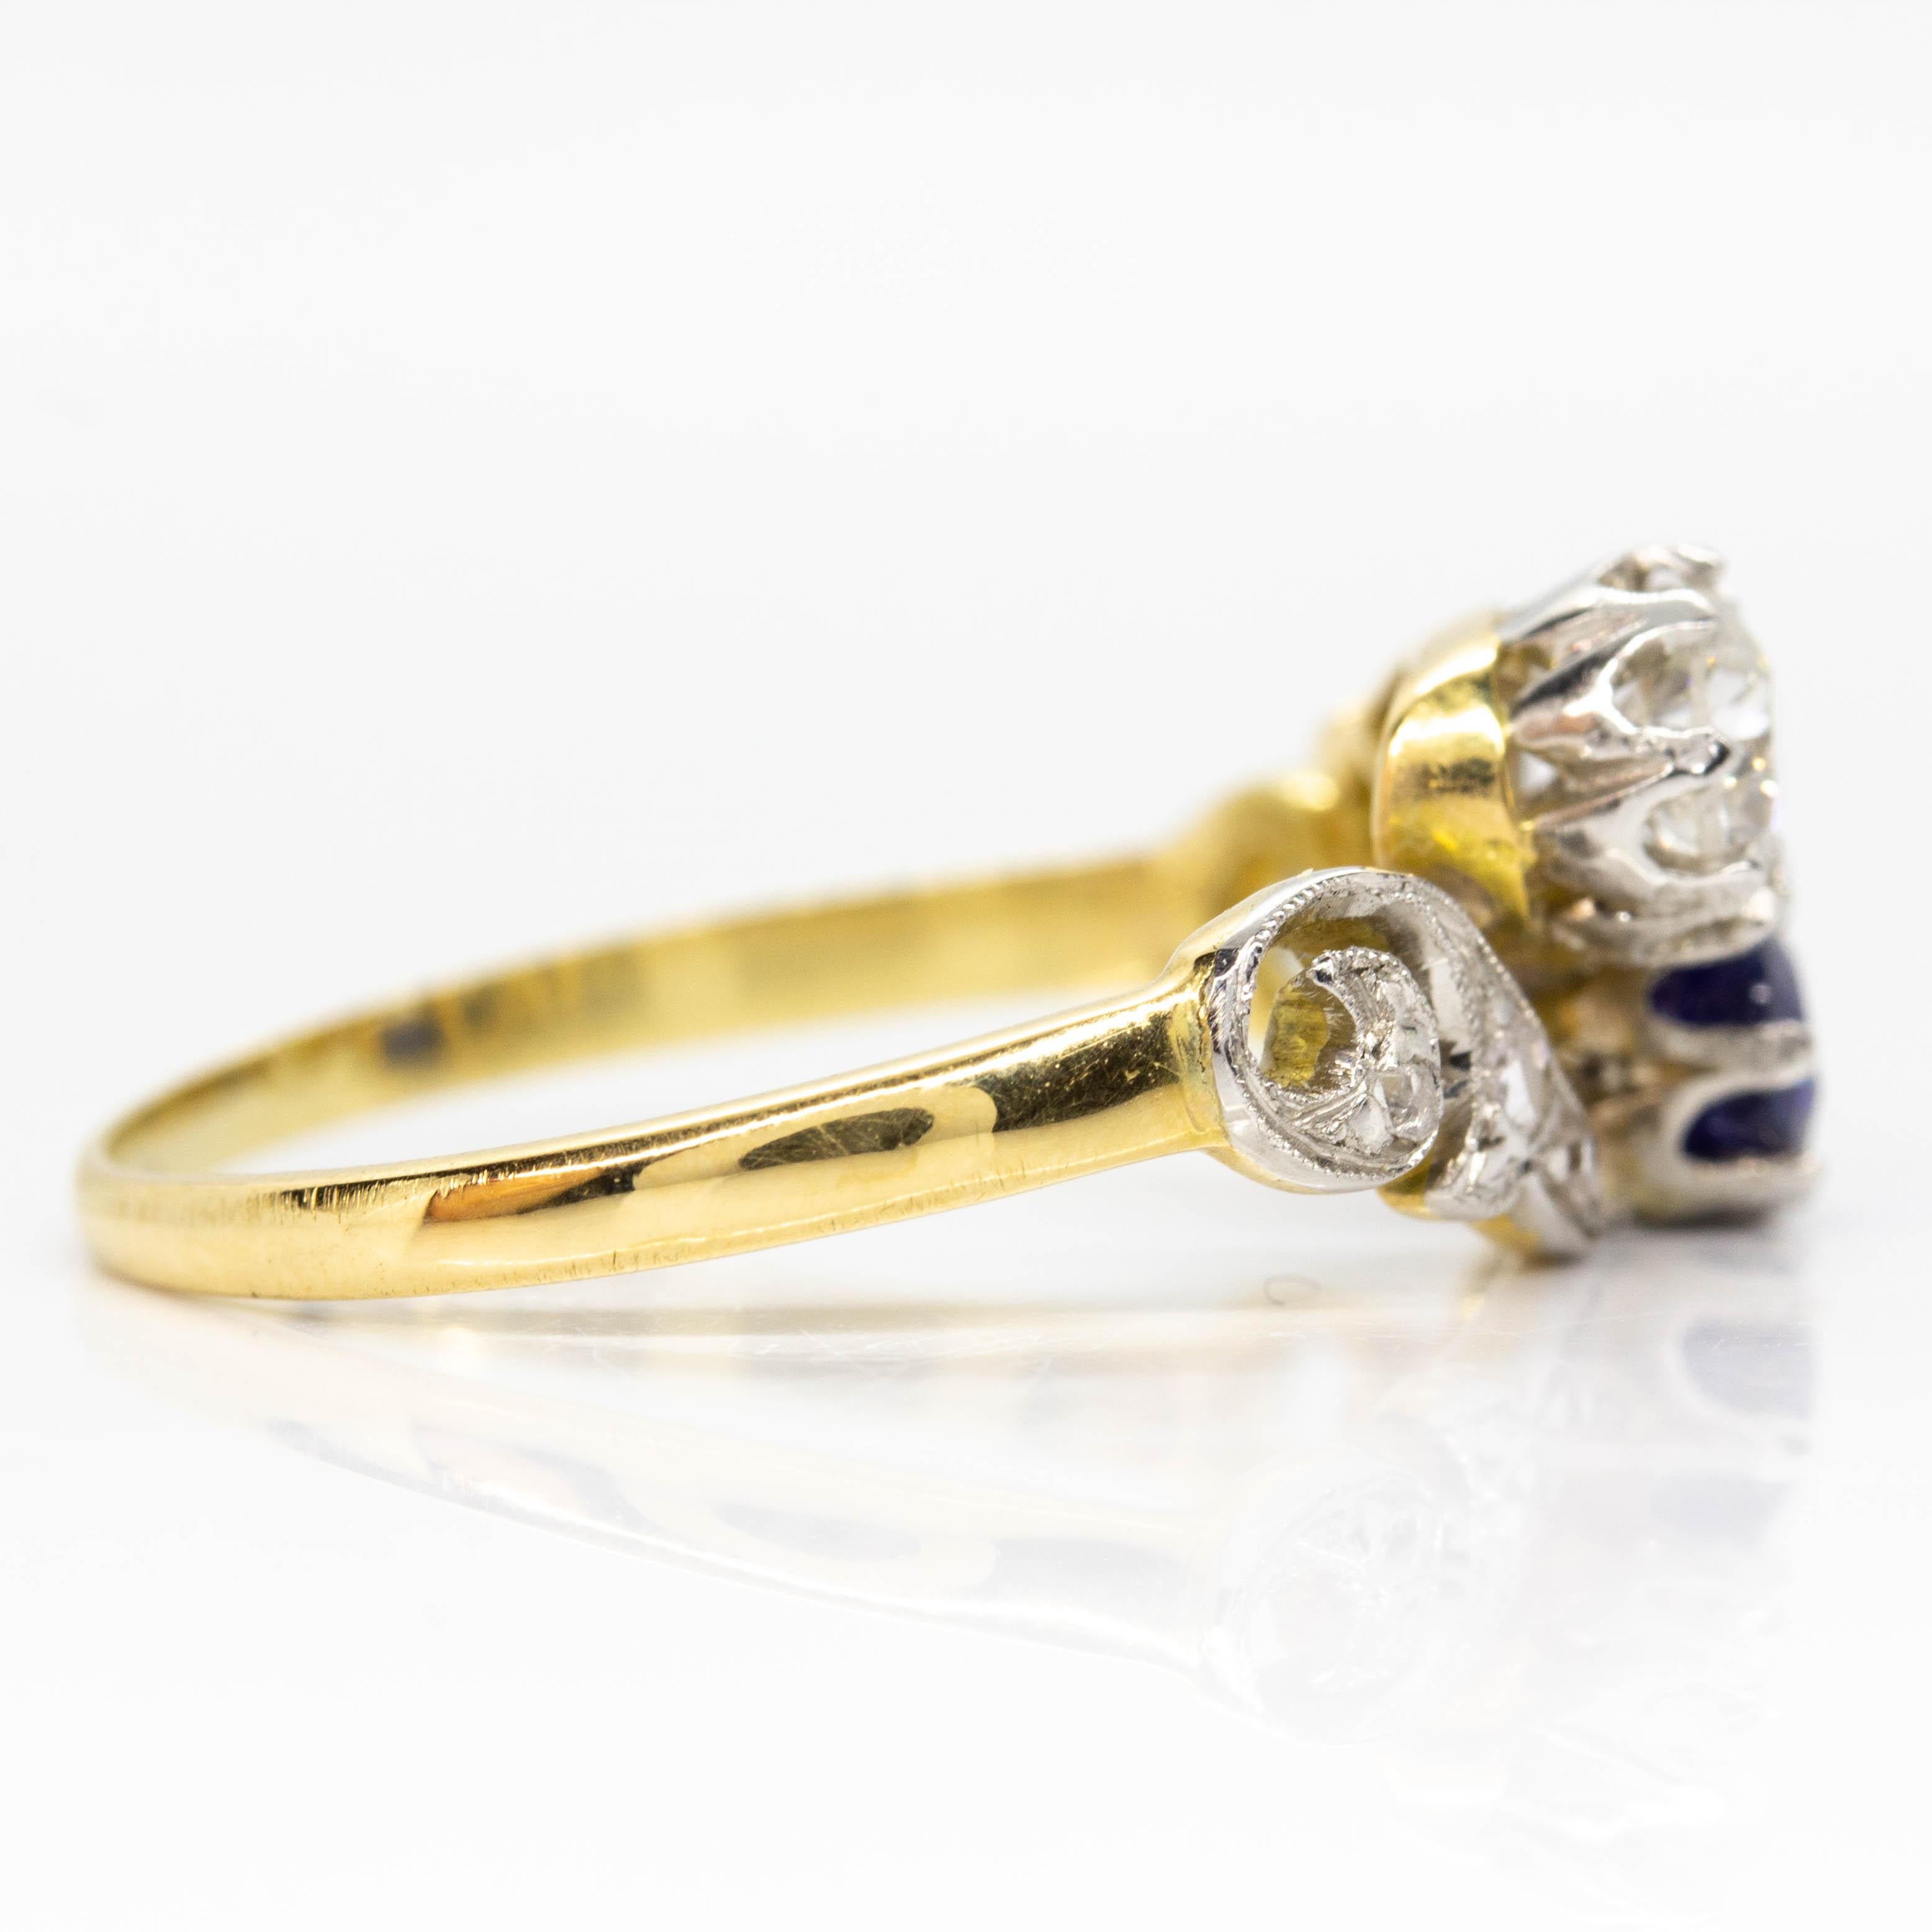 Period: Art Nouveau (1890-1919)
Composition: 18K Gold and Platinum
•	1 old mine cut diamond H-VS2 0.30ctw.
•	1 natural oval cut sapphire 0.20ctw.
•	6 rose cut diamonds I-VS2 0.08ctw.
Ring size: 6 ½ 
Ring face measure: 10mm by 12mm
Rise above finger: